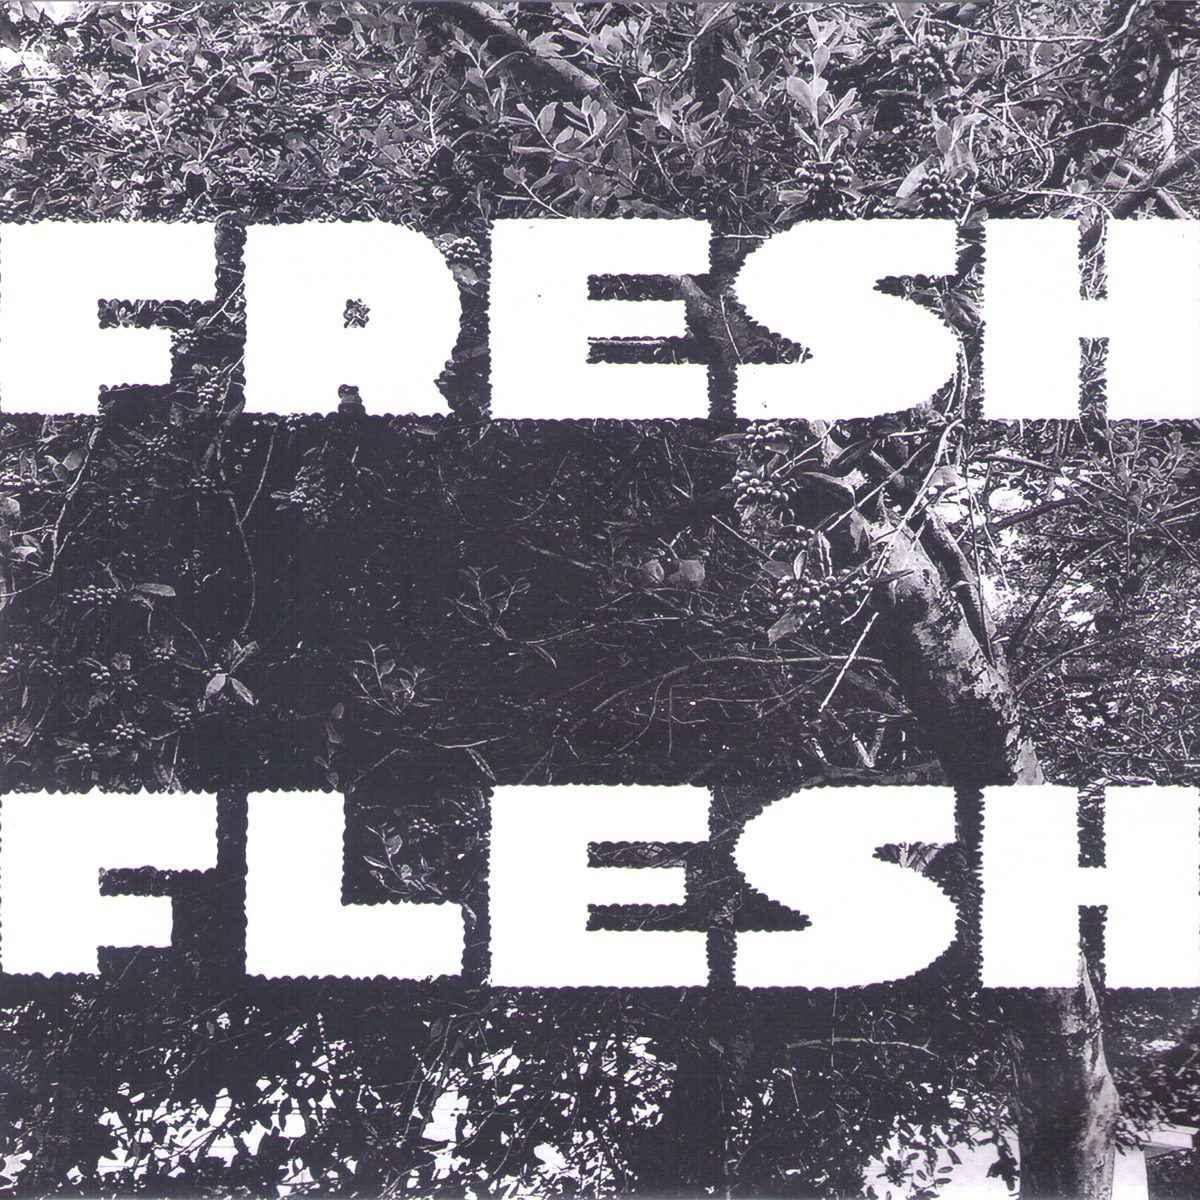 Fresh Flesh- Say It Say Yes 7” ~COVER LTD 85 HAND NUMBERED!